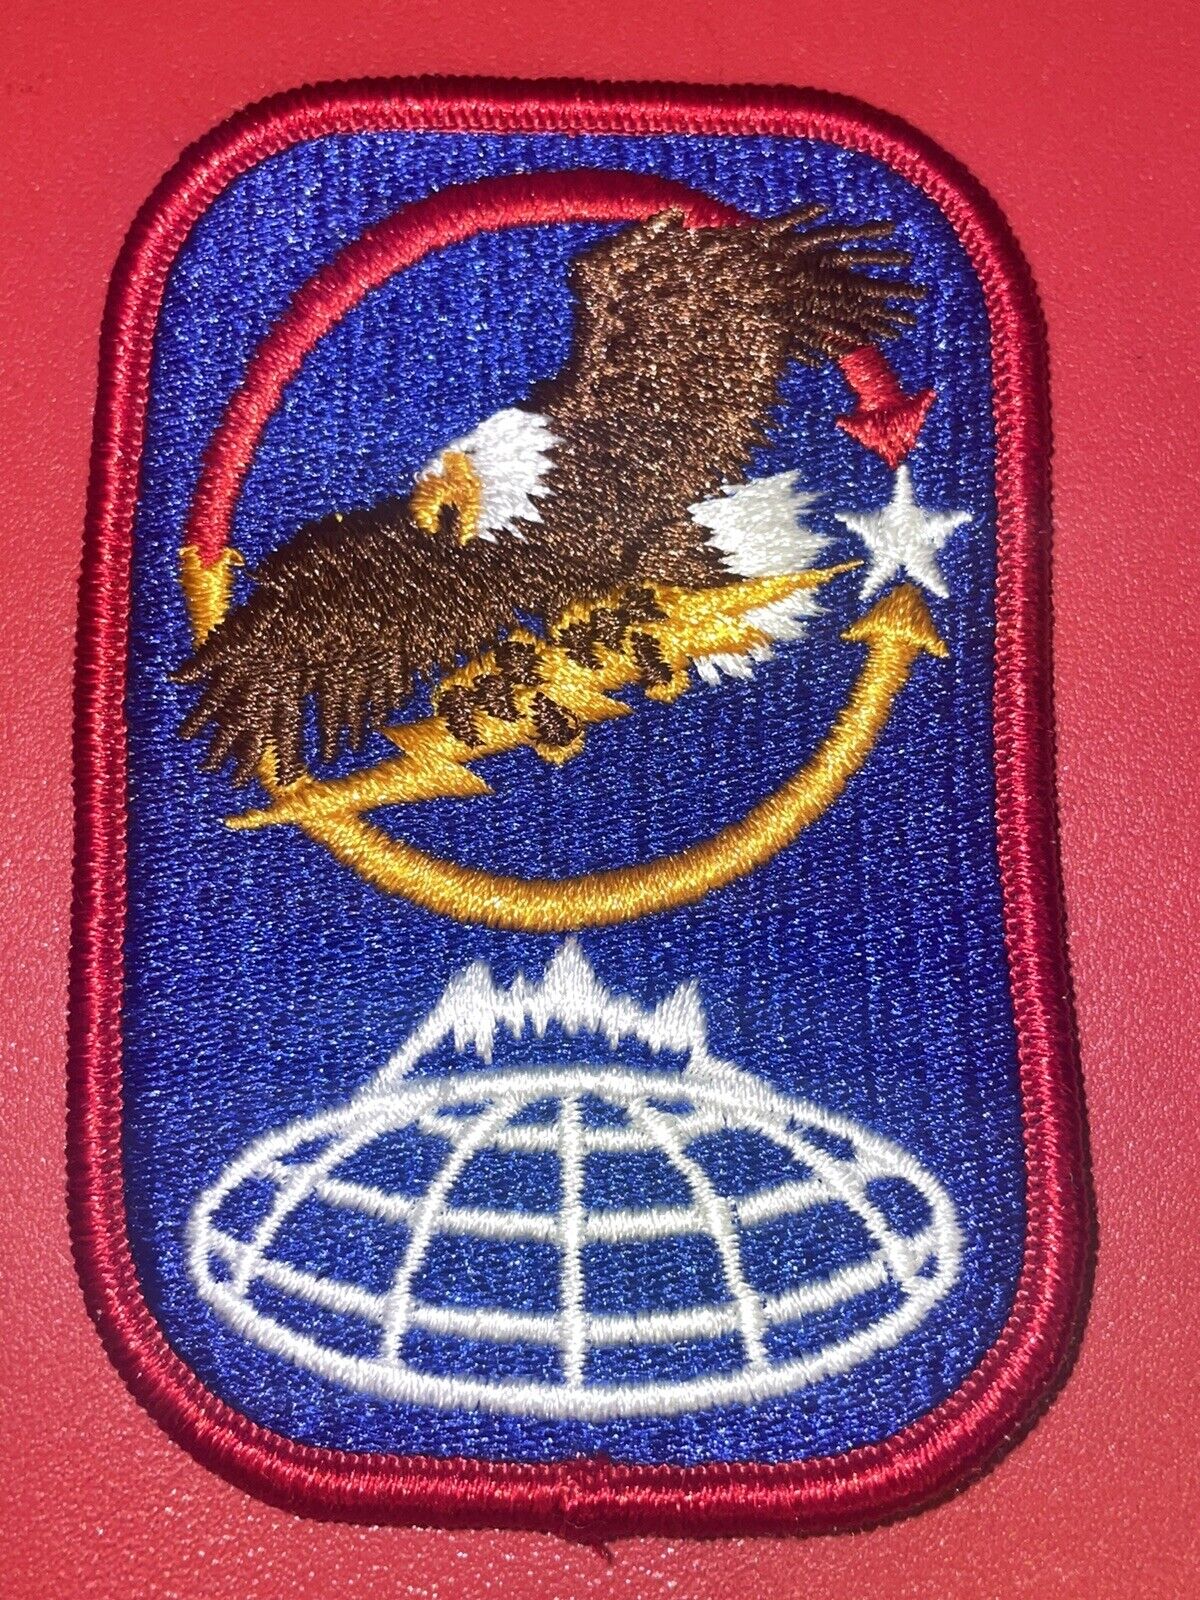 1970s-Modern Day 100th Missile Defense Brigade Patch(X)